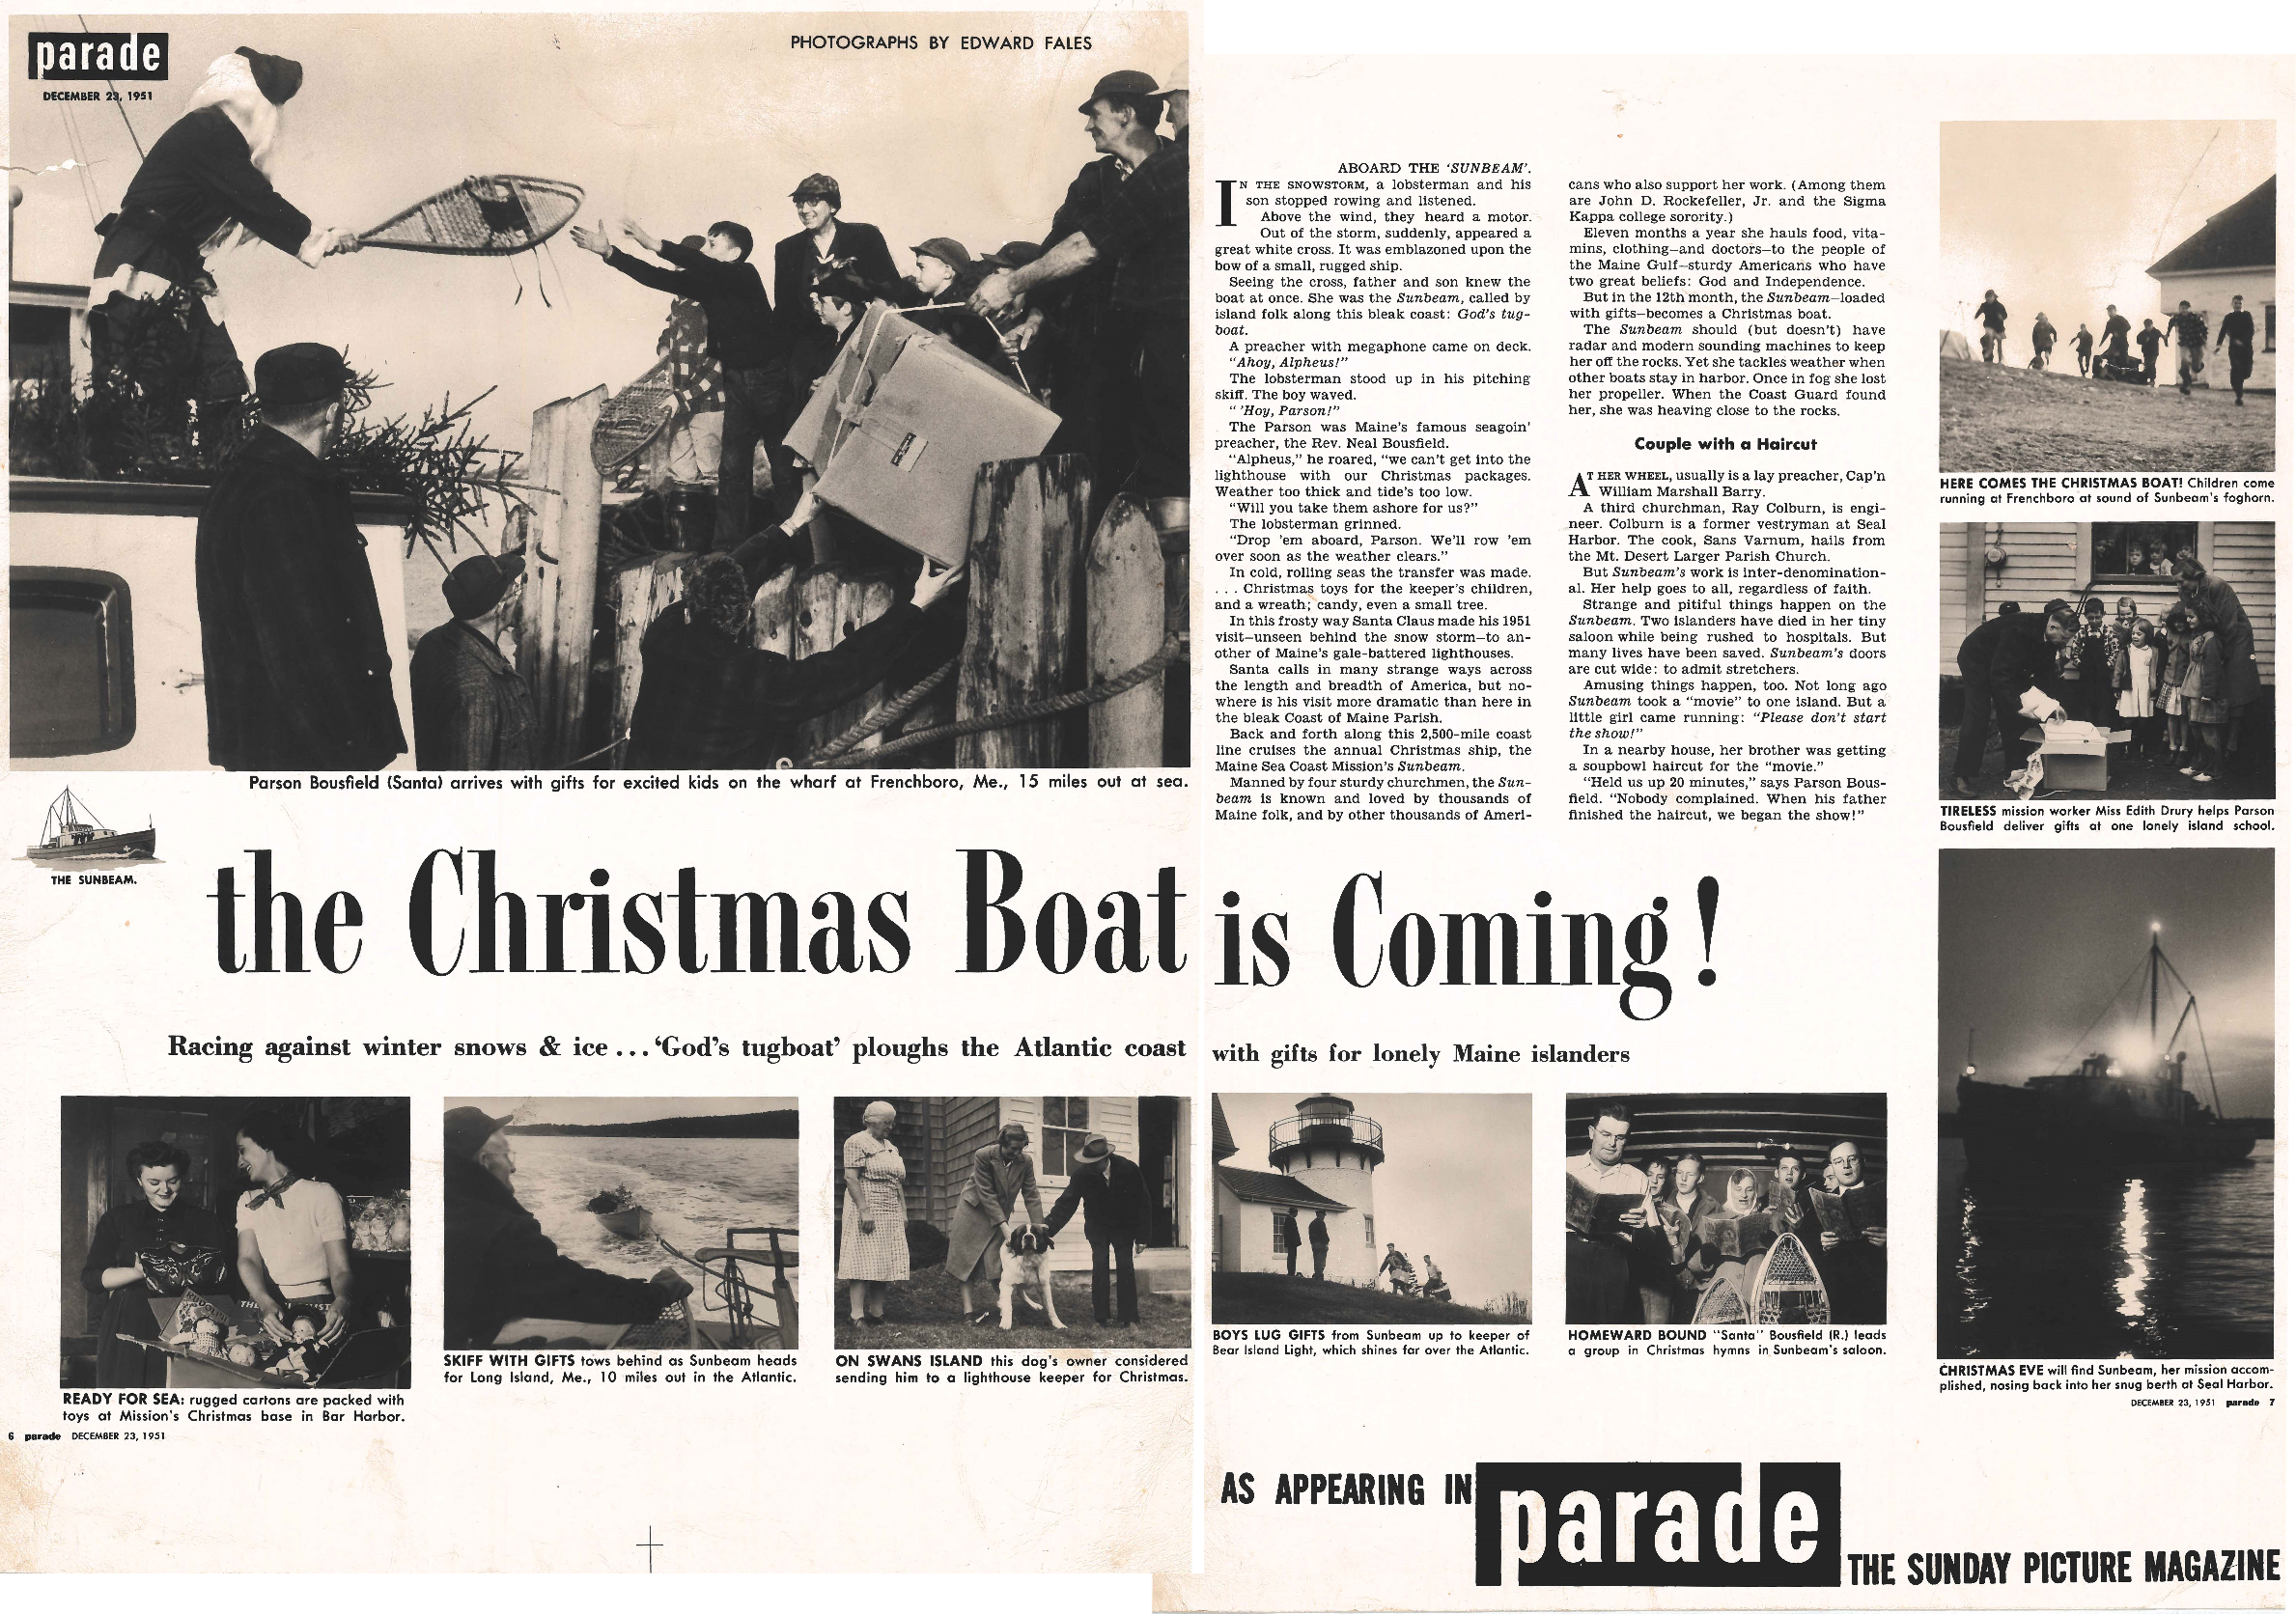 A scan of an article called "The Christmas Boat is Coming" printed in Parade Magazine